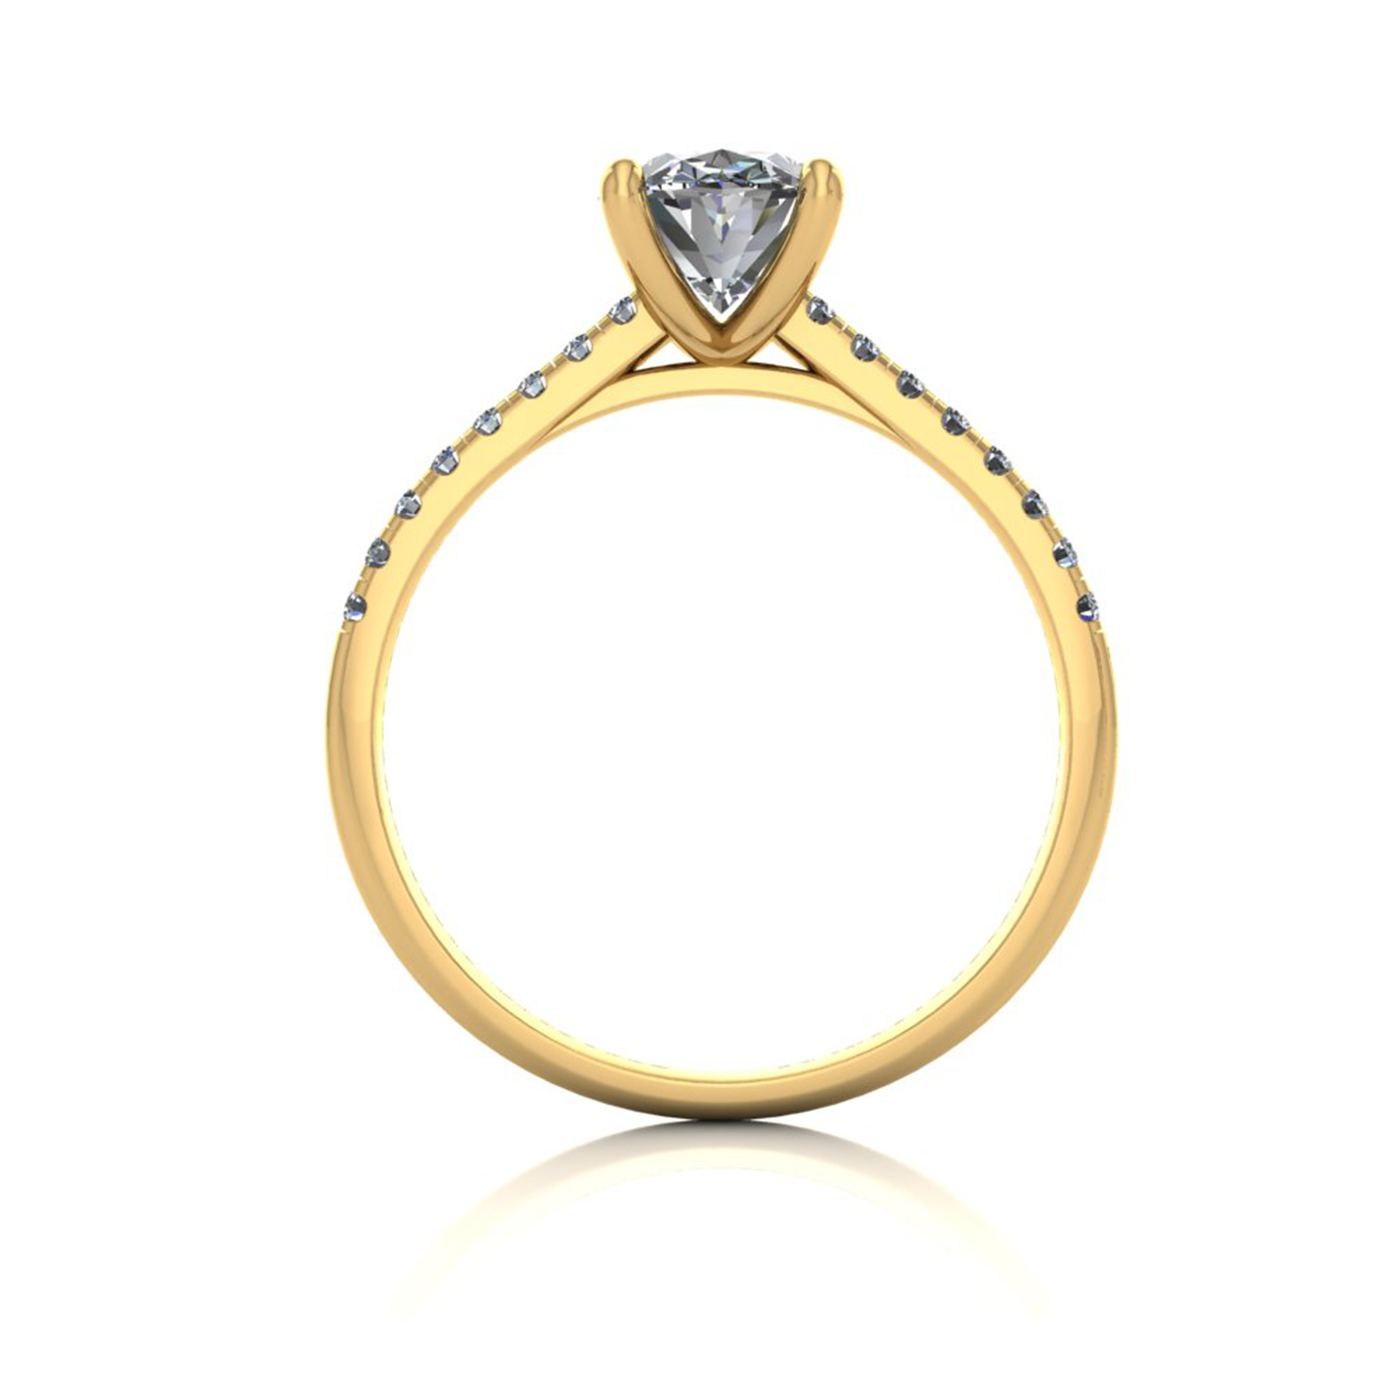 18k yellow gold  1,20 ct 4 prongs oval cut diamond engagement ring with whisper thin pavÉ set band Photos & images